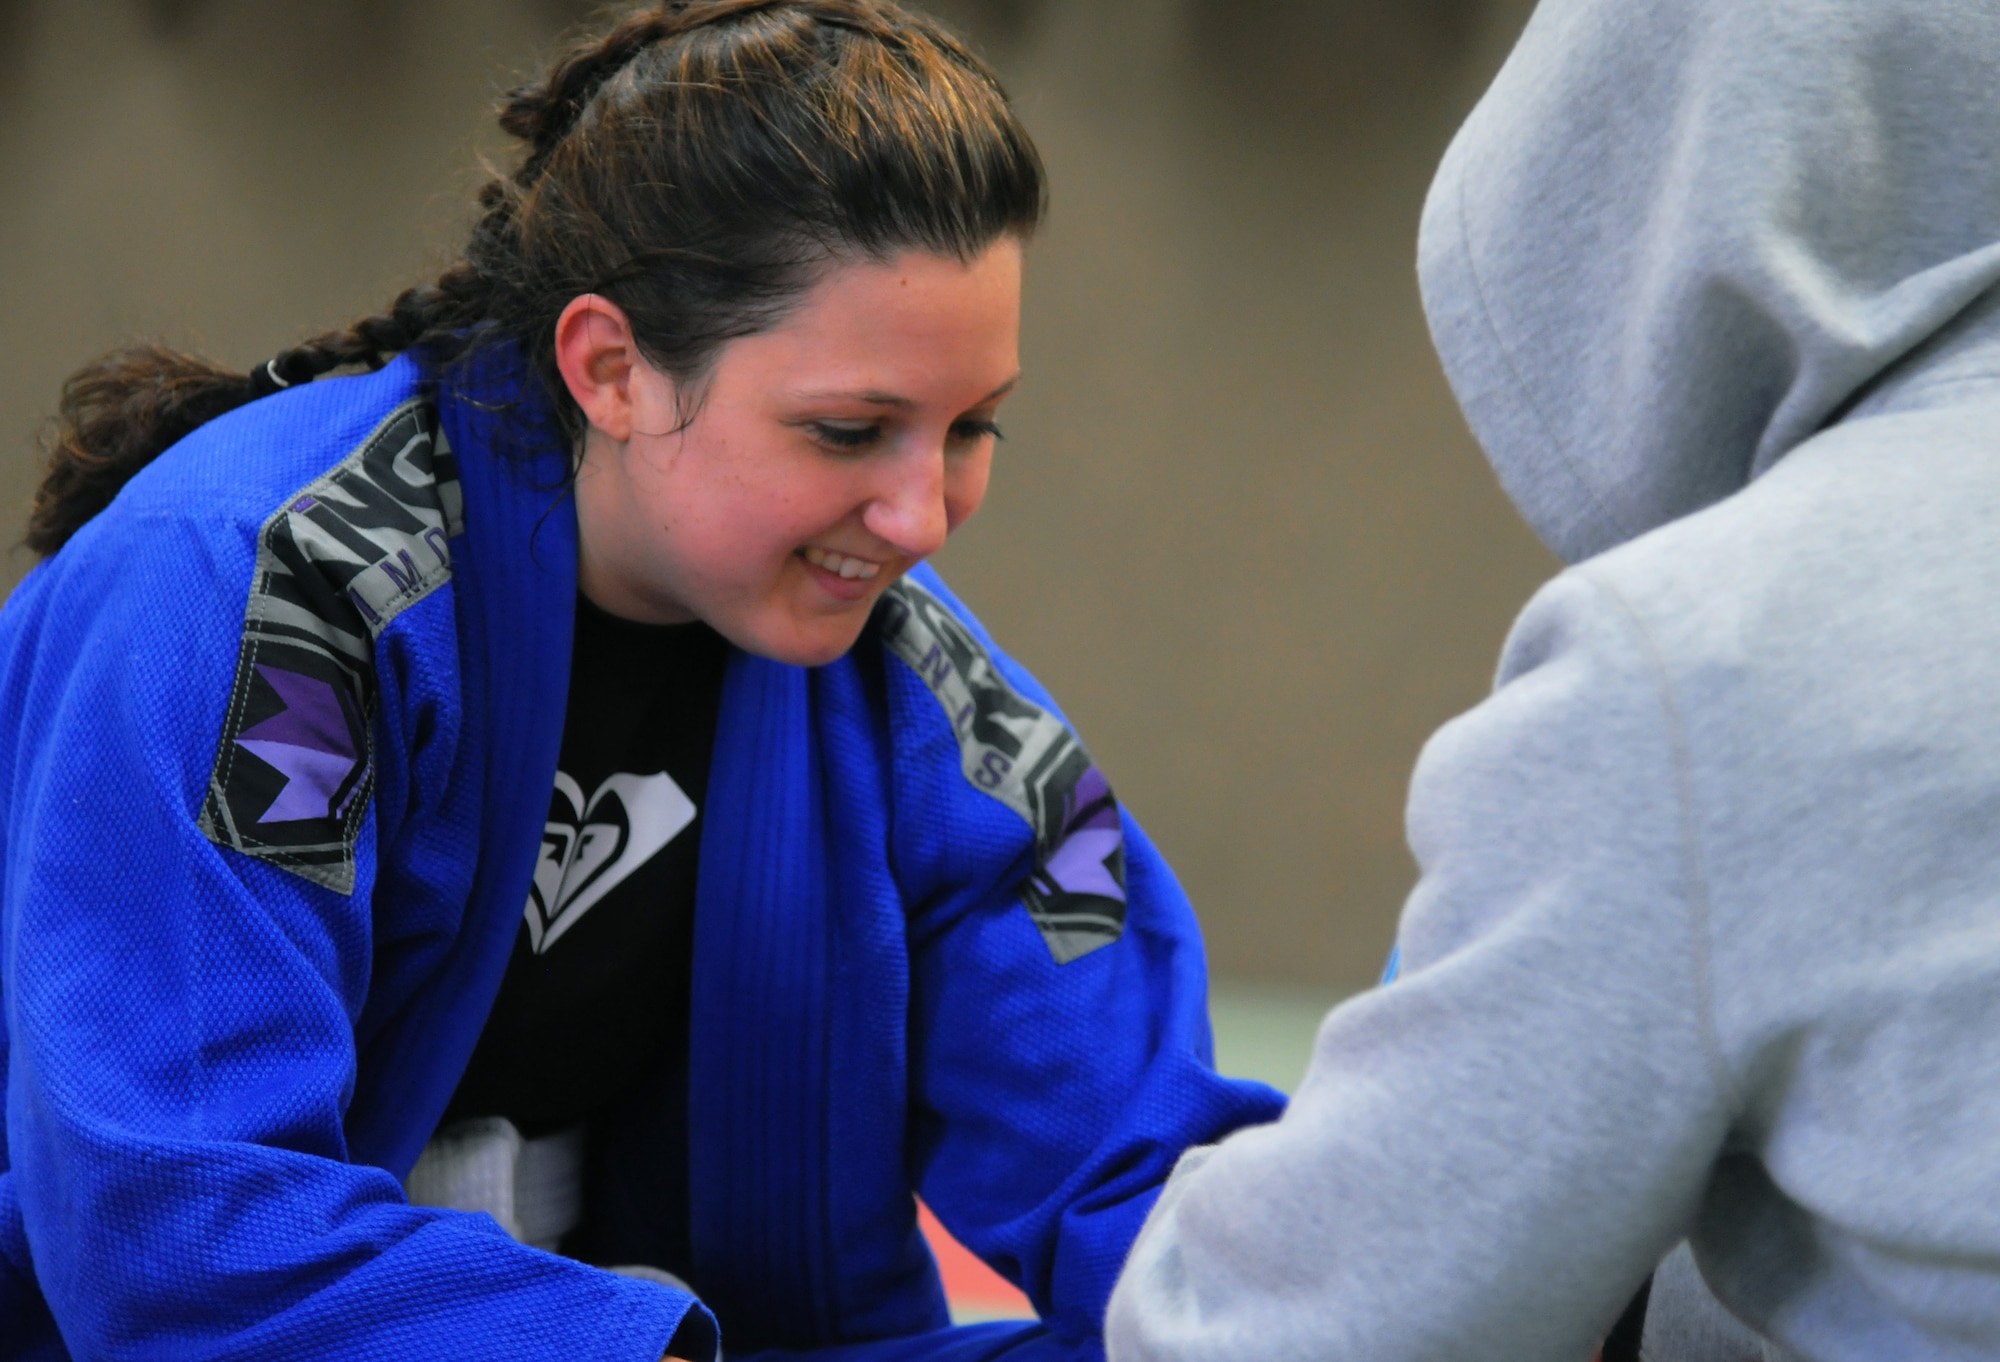 Mariah Johnson, a 52nd Force Support Squadron value-added tax officer and Spangdahlem Brazilian Jiu Jitsu class member, left, smiles while her coach wraps her hands before her first match at the Submissao competition in Karlsruhe, Germany, Feb. 20, 2016. Johnson lost seven pounds to make the weight class for her match and trained with fellow martial artists. (Courtesy photo)